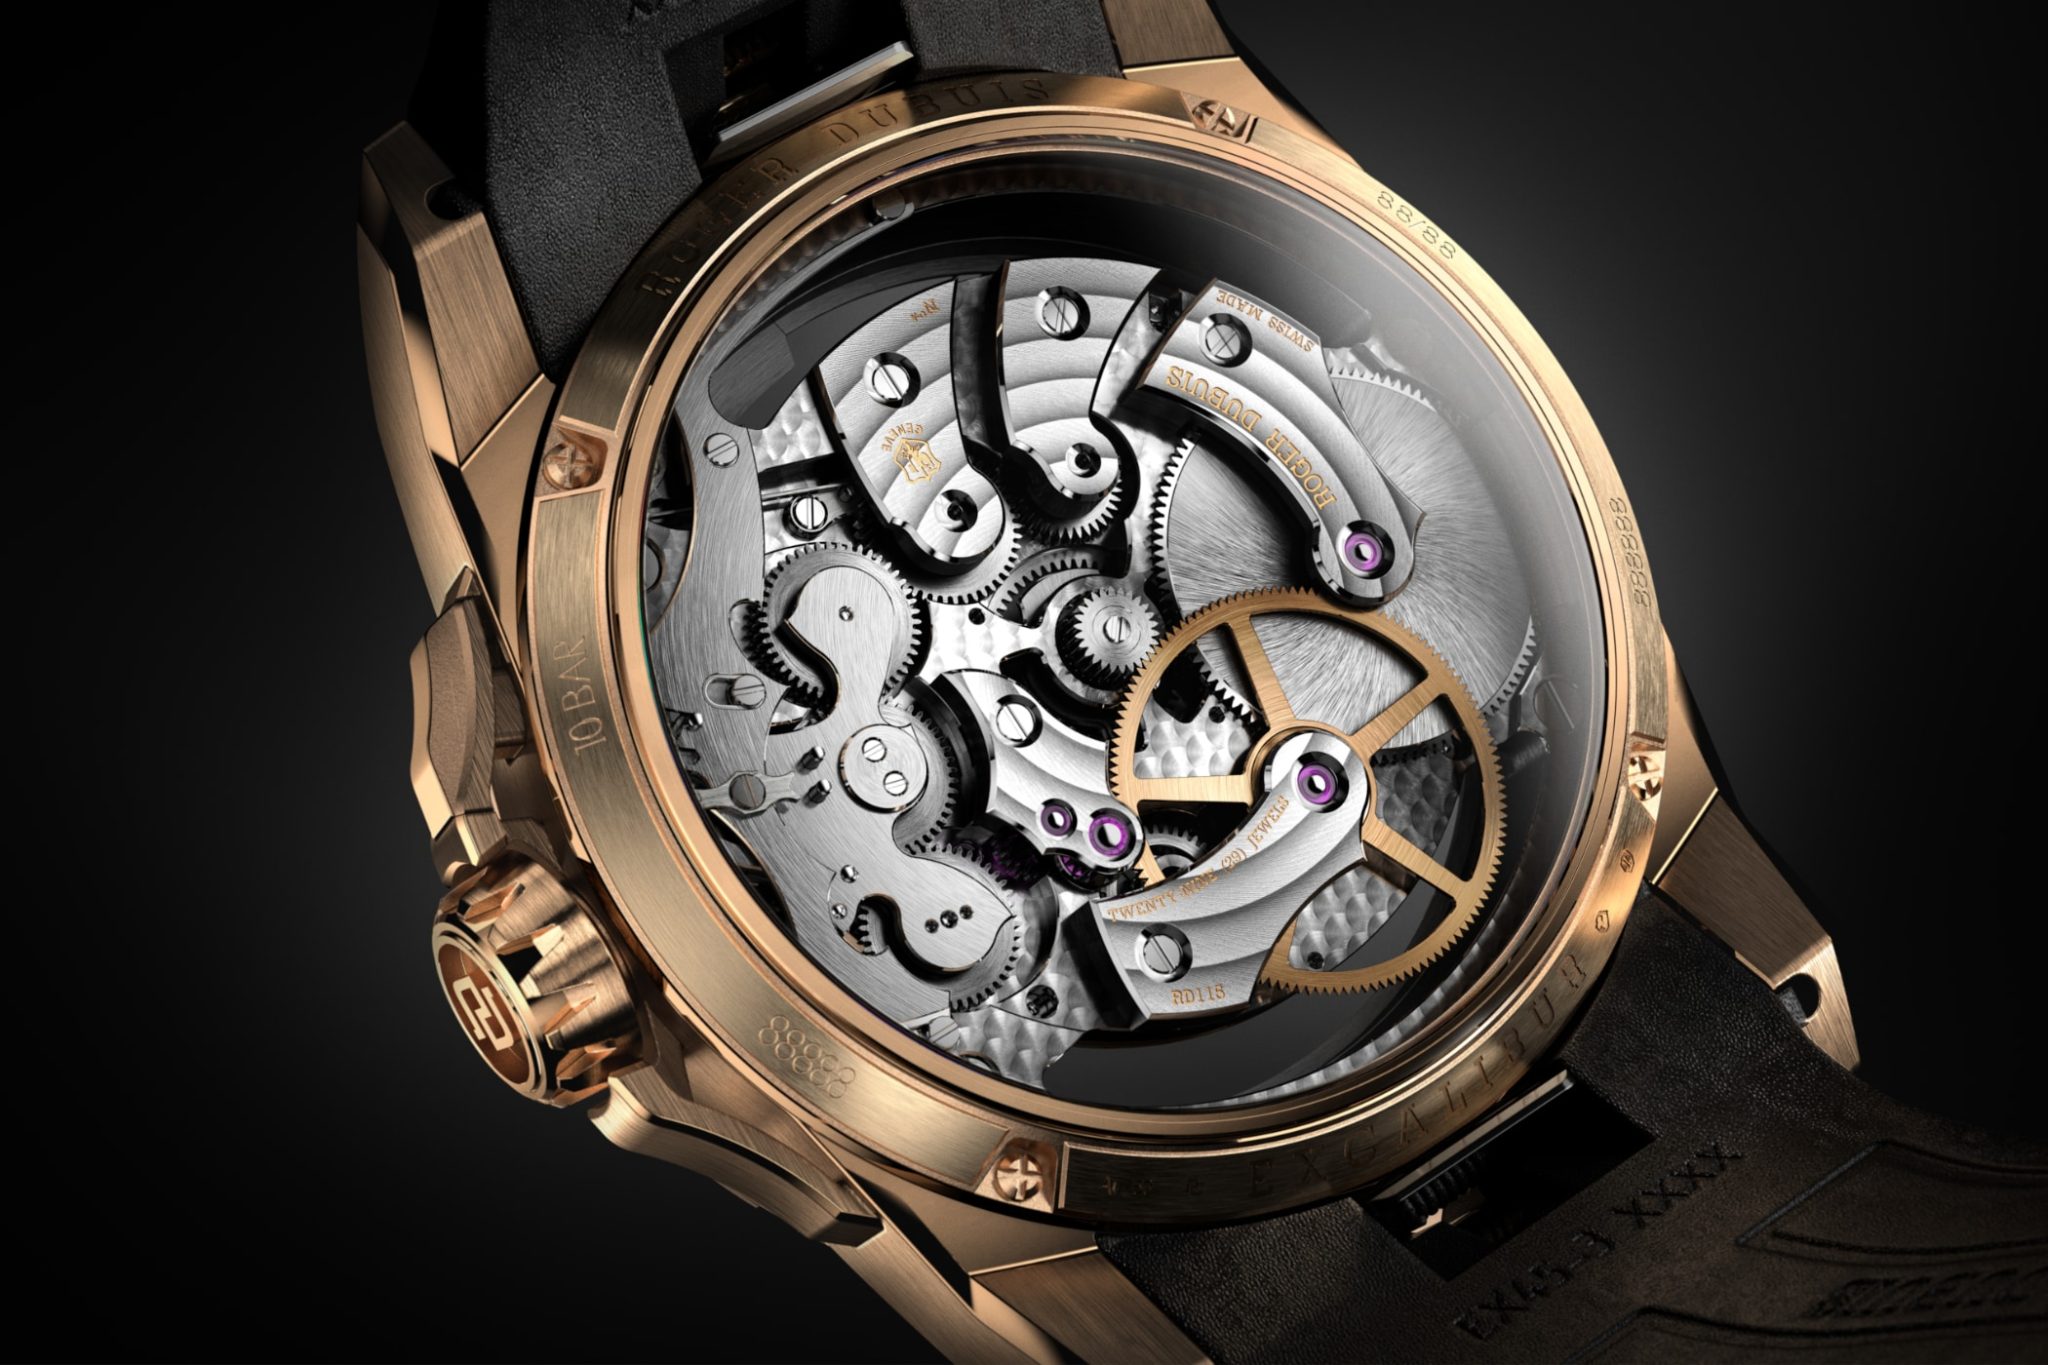 roger-dubuis-orbis-in-machina-rddbex1119-movement